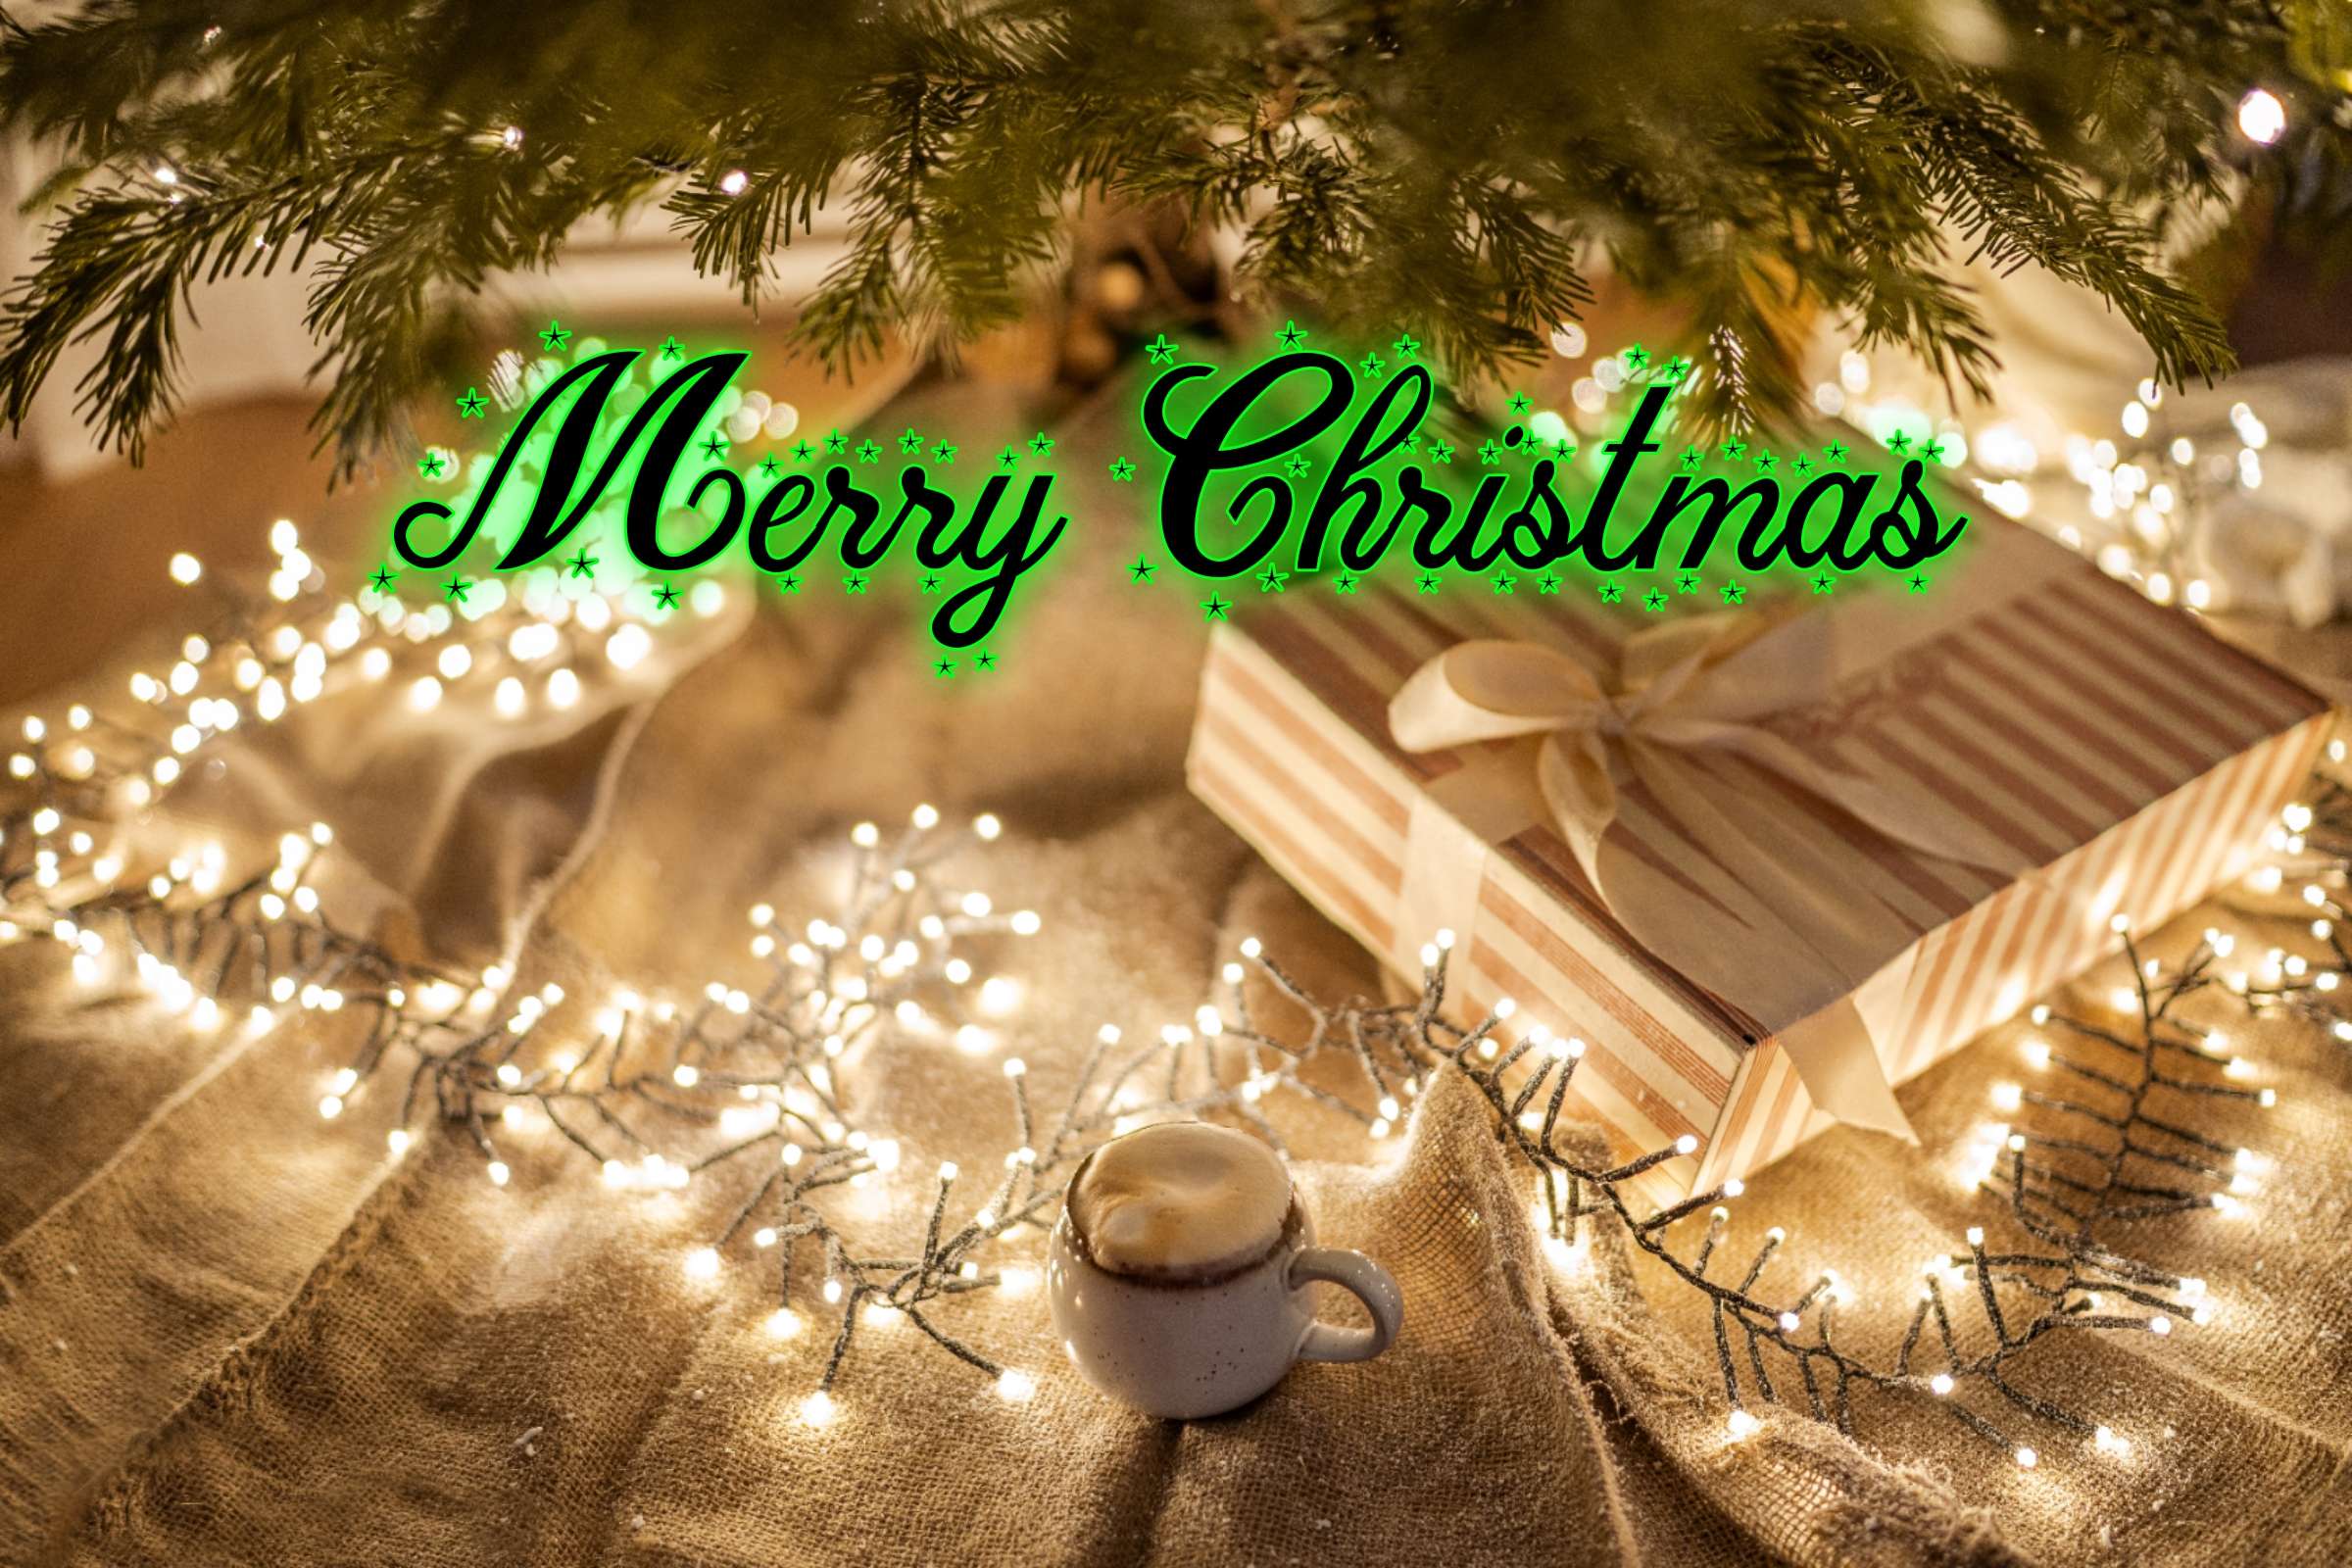 Happy Christmas Wishes Images